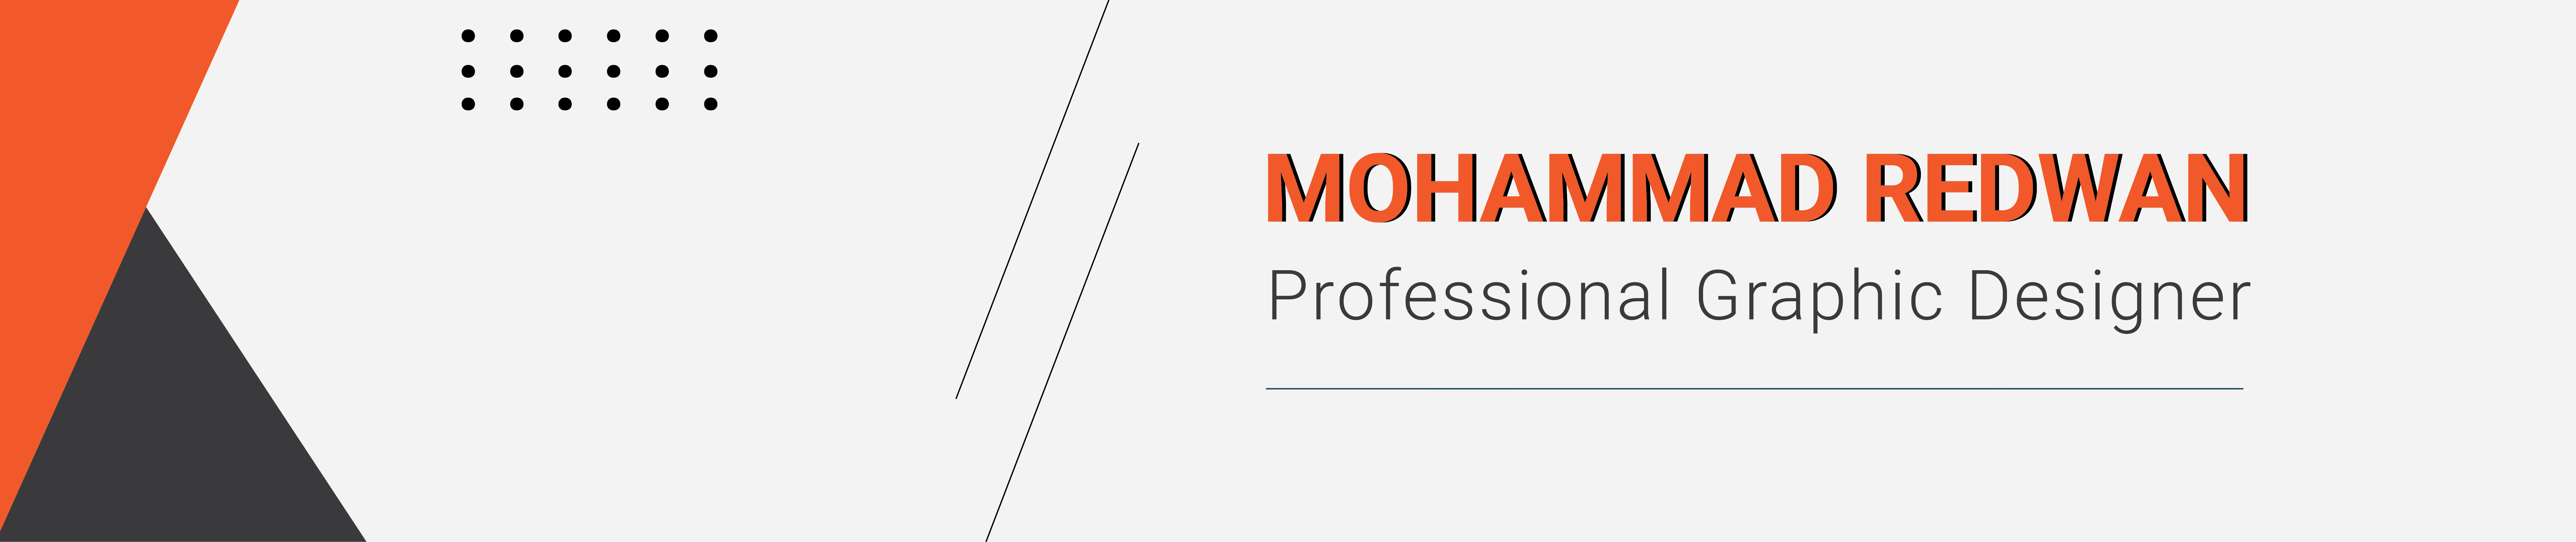 Mohammad Redwan's profile banner